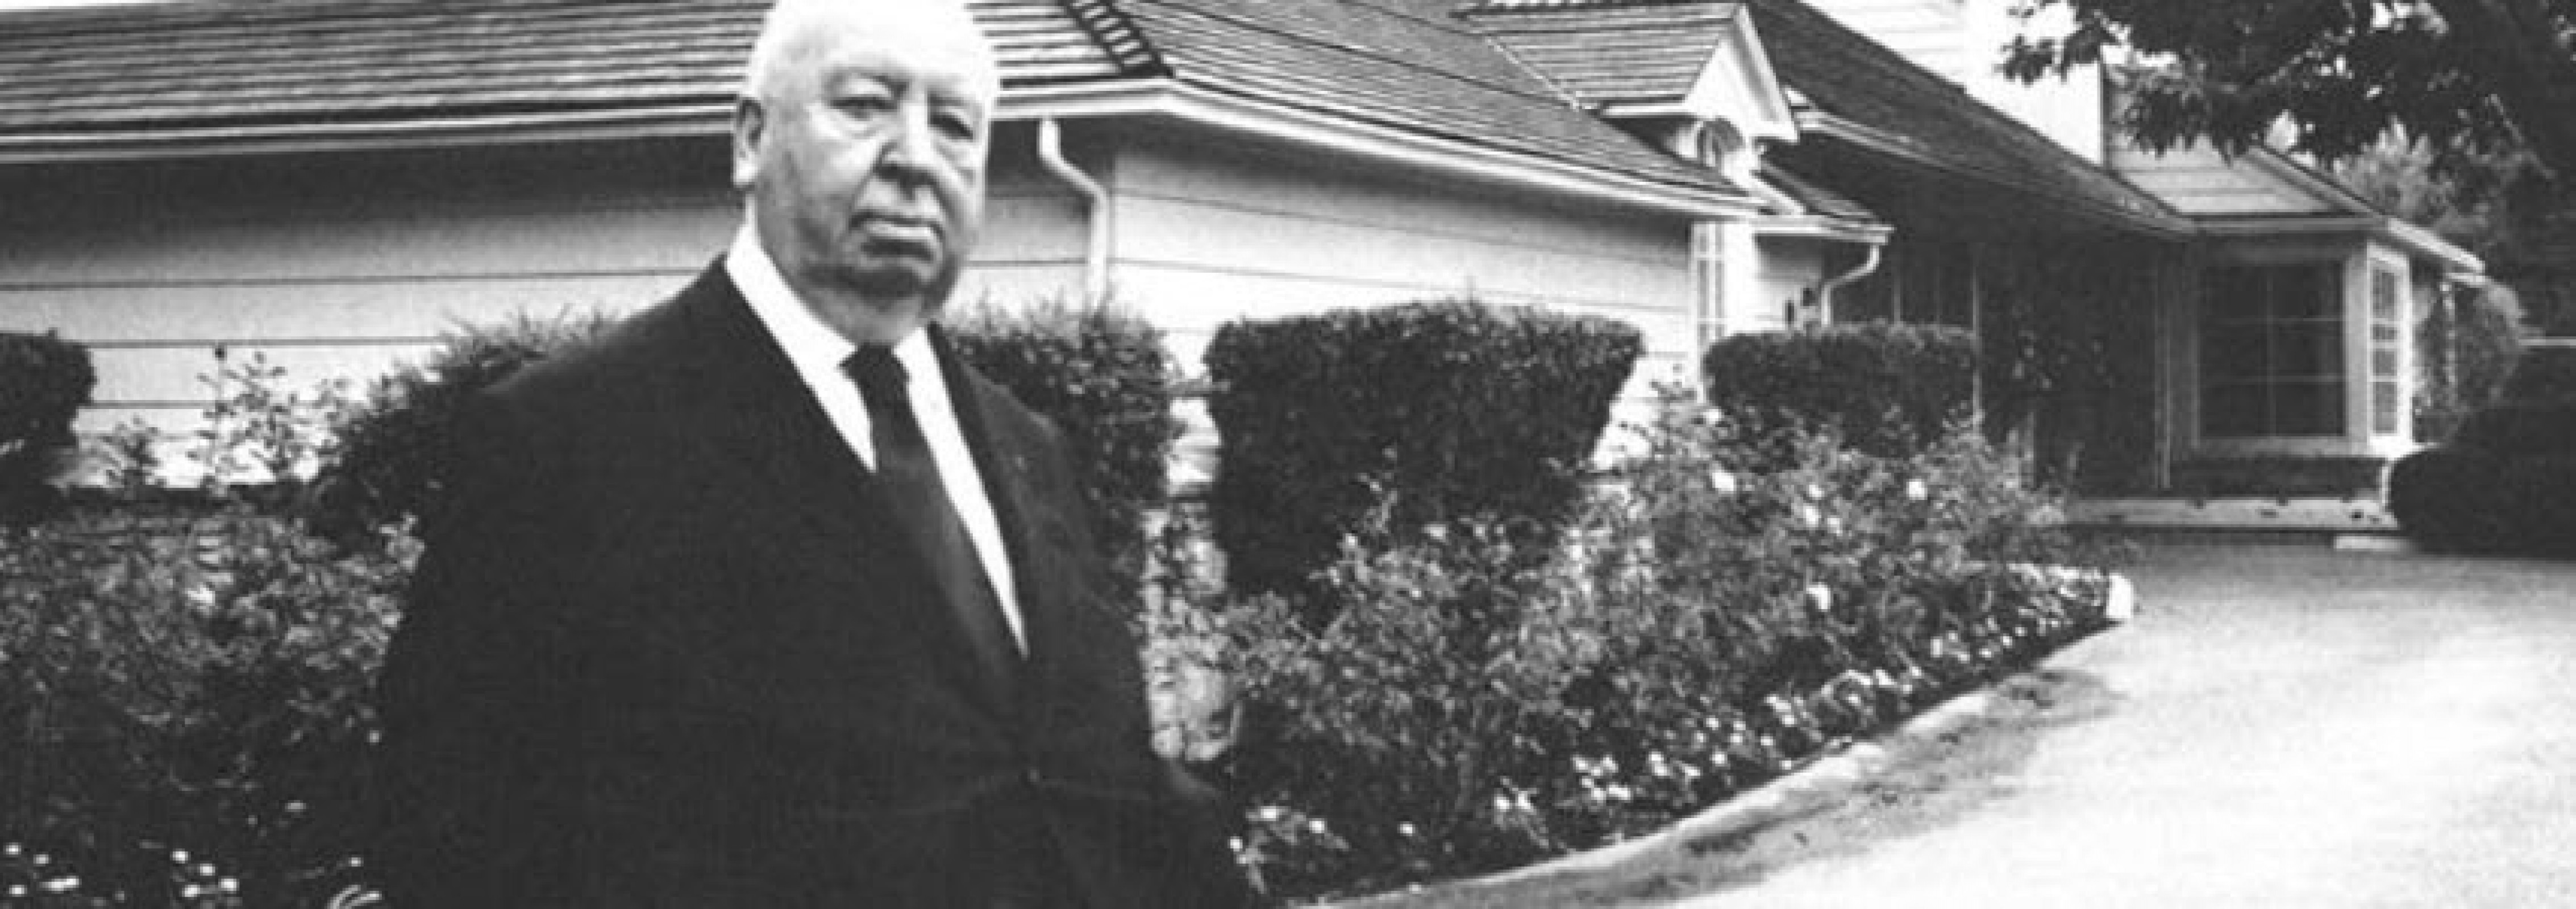 alfred hitchcock hour last seen wearing blue jeans